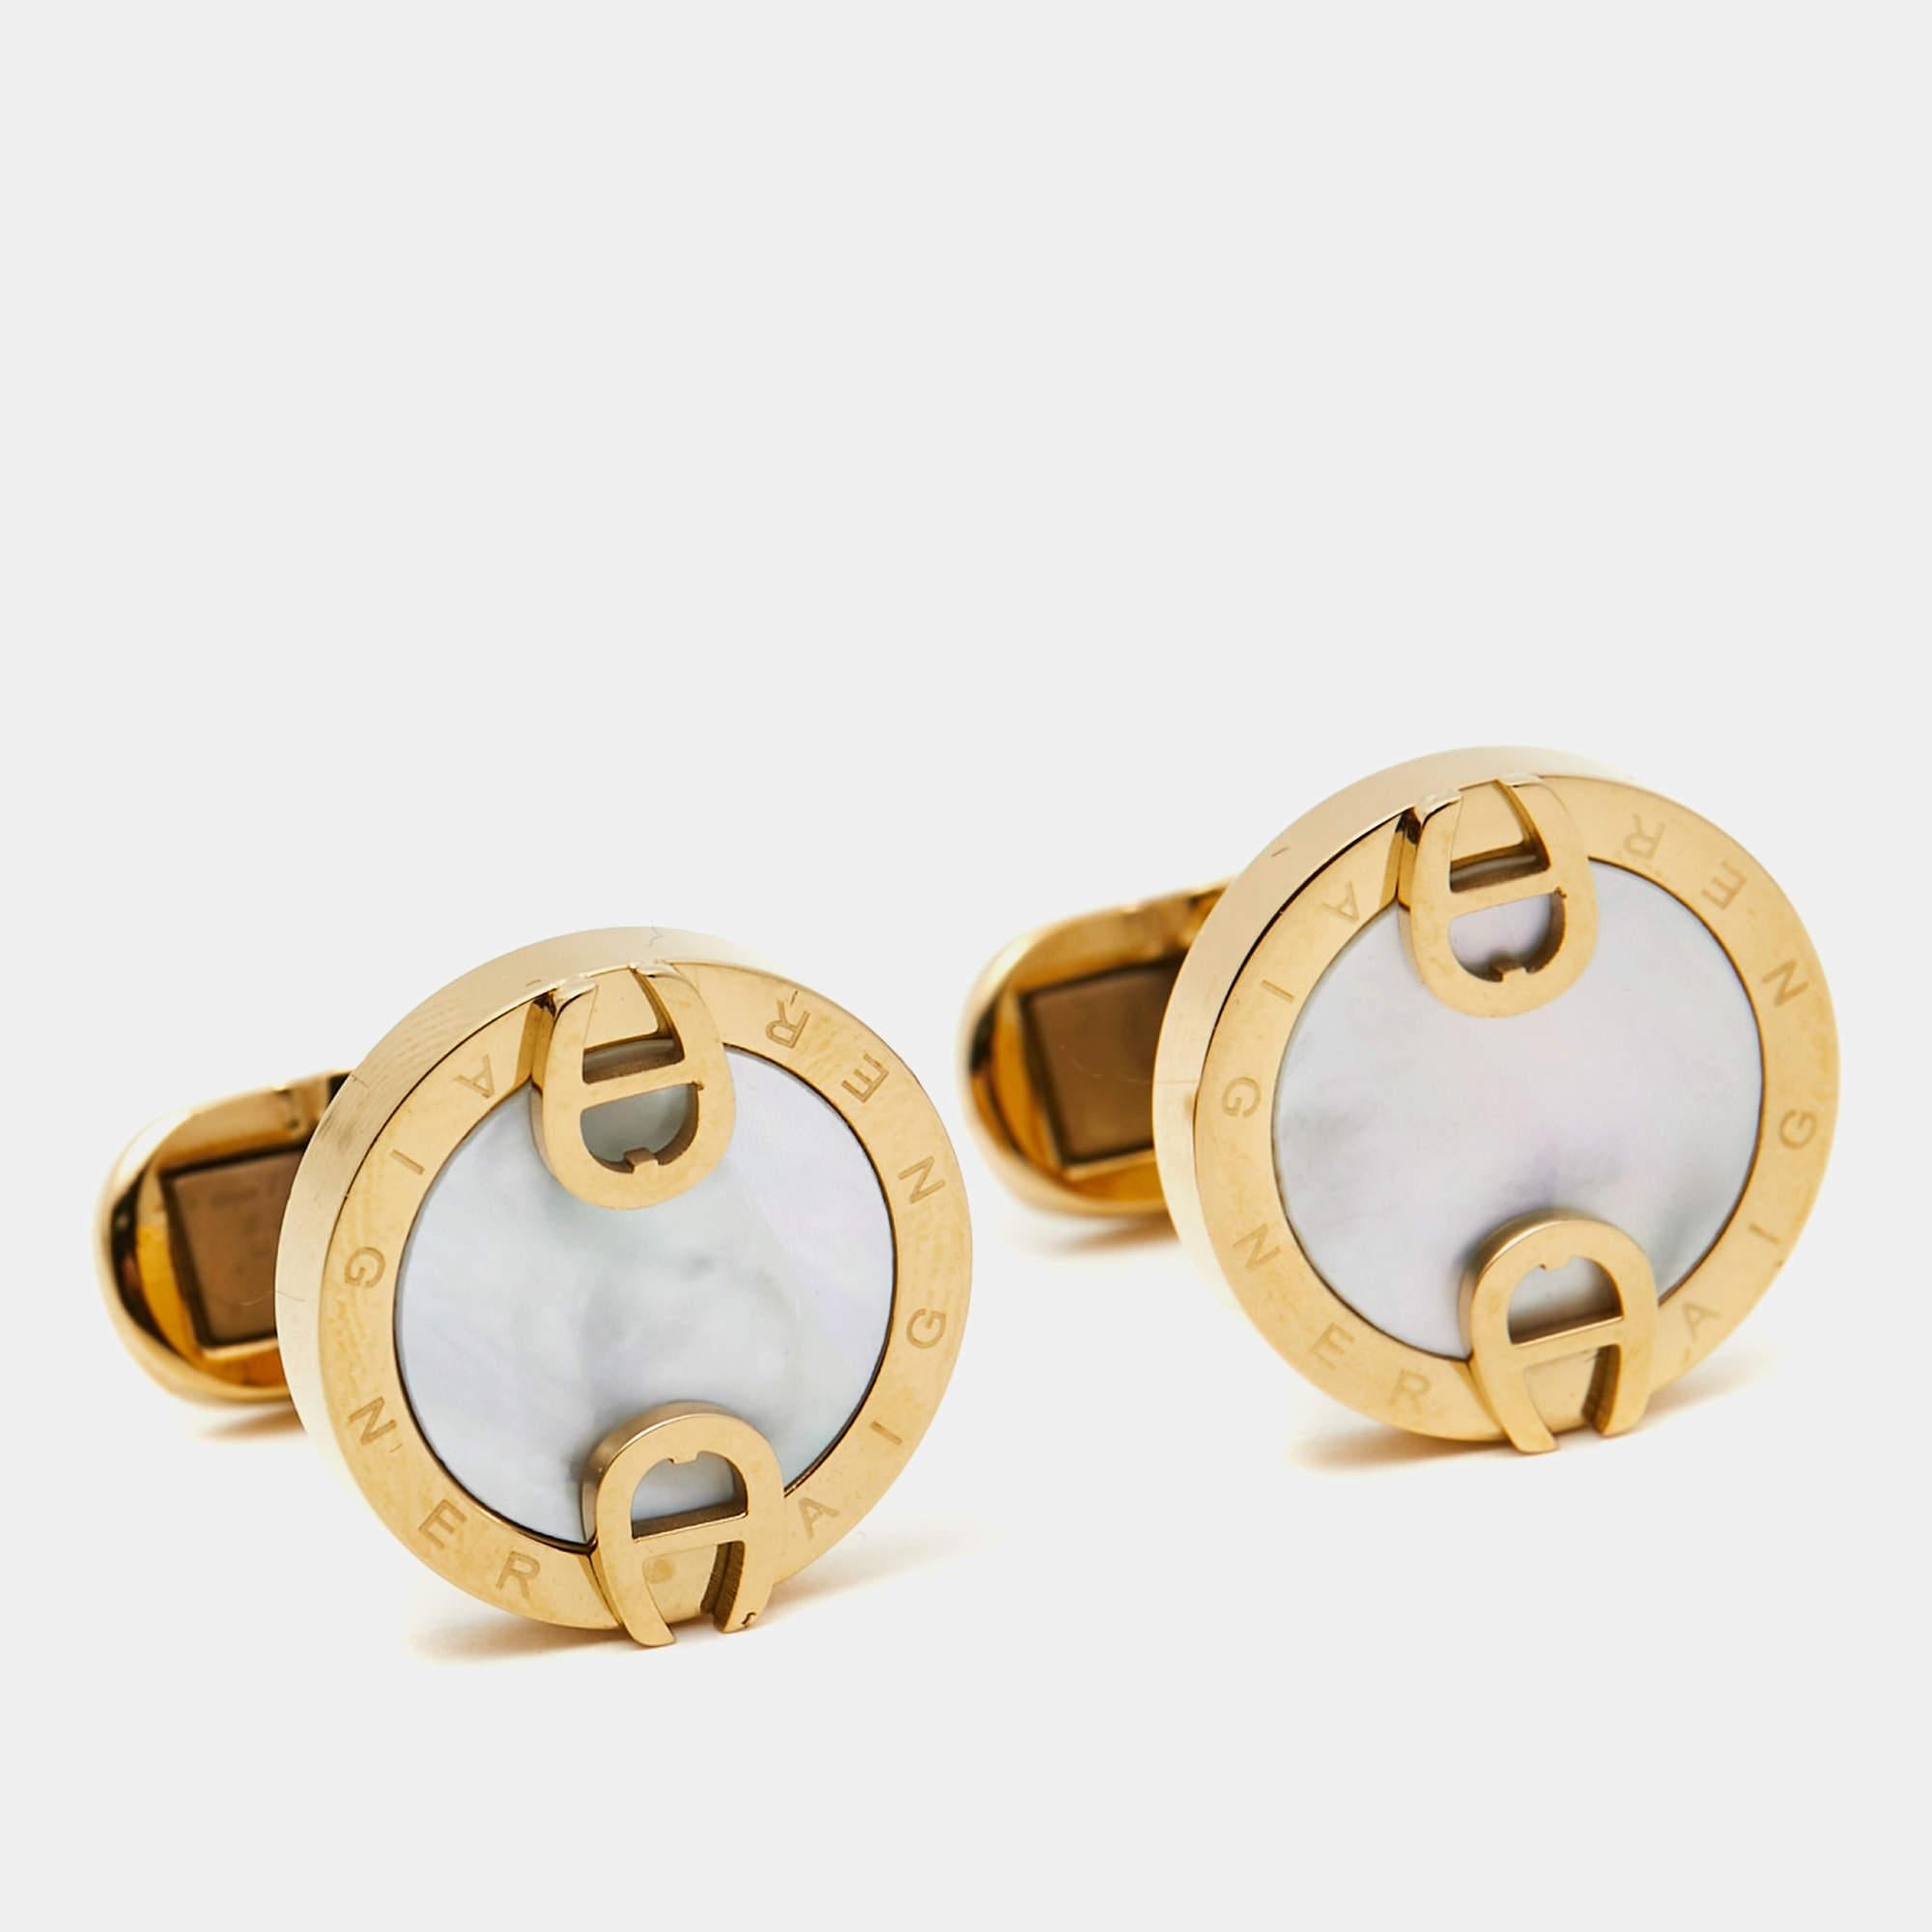 This luxe creation from Aigner is crafted from gold-tone metal and features logo details and mother of pearl inlay. Enhance your formal style by pairing this set of cufflinks with your neat shirts.

Includes: Original Dustbag

